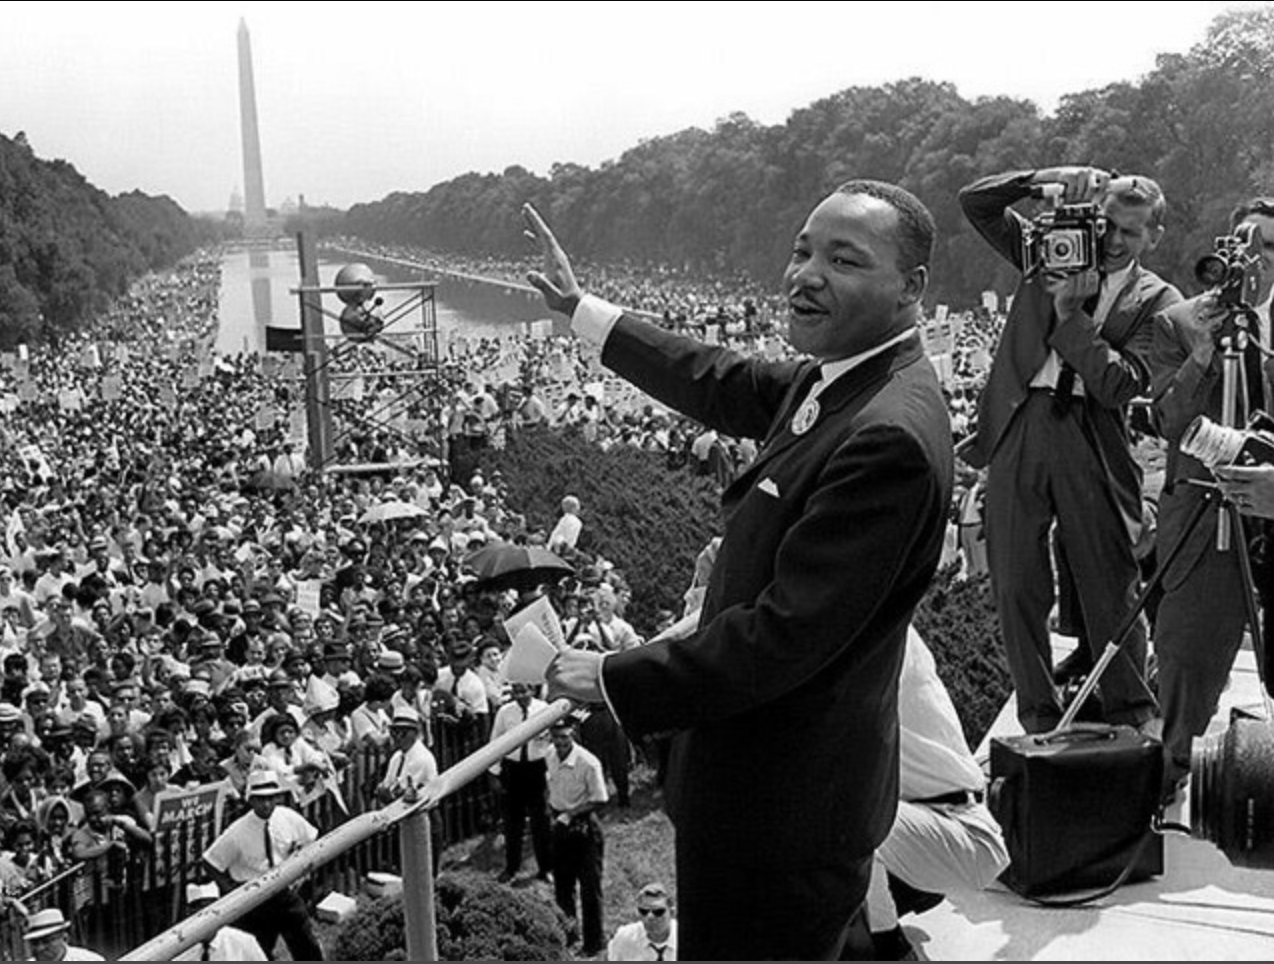 The legacy of Martin Luther King Jr.